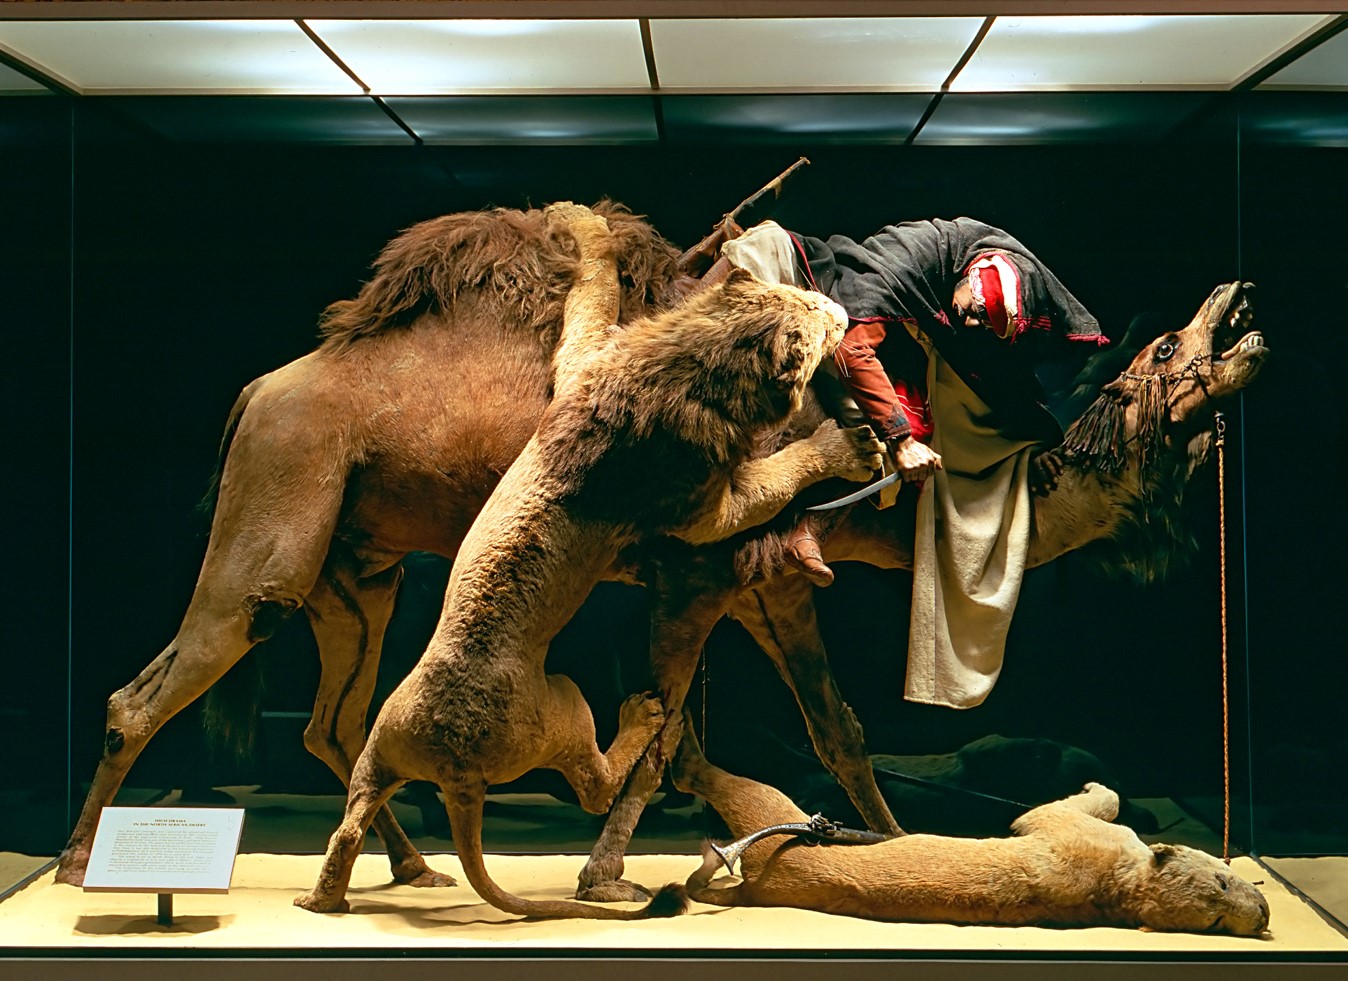 Museum diorama of lions attacking a man on a camel 